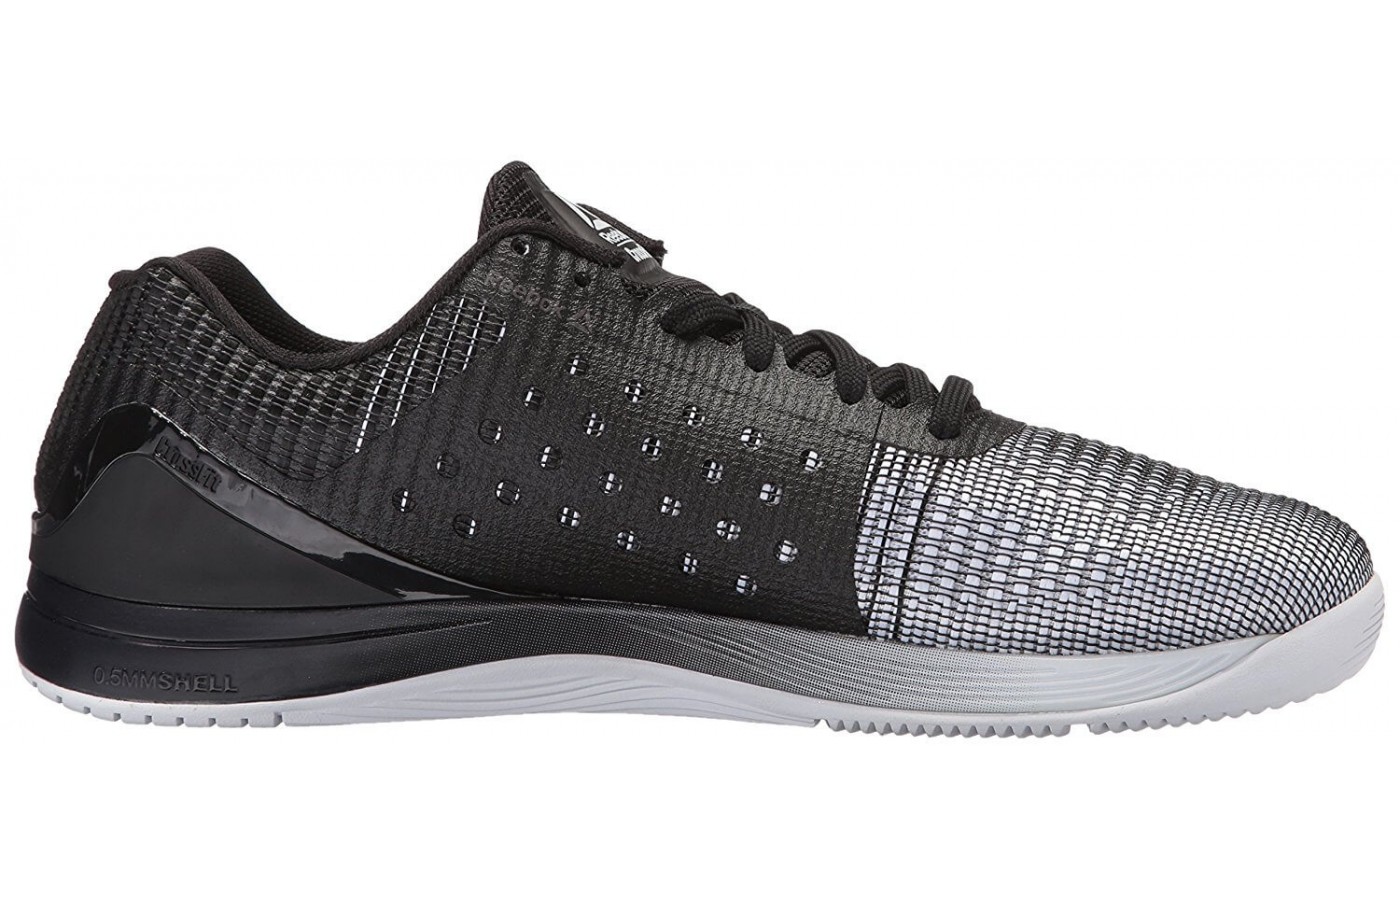 Compressed EVA midsole material ensures that the Reebok Crossfit Nano 7 Weave is somewhat supportive.